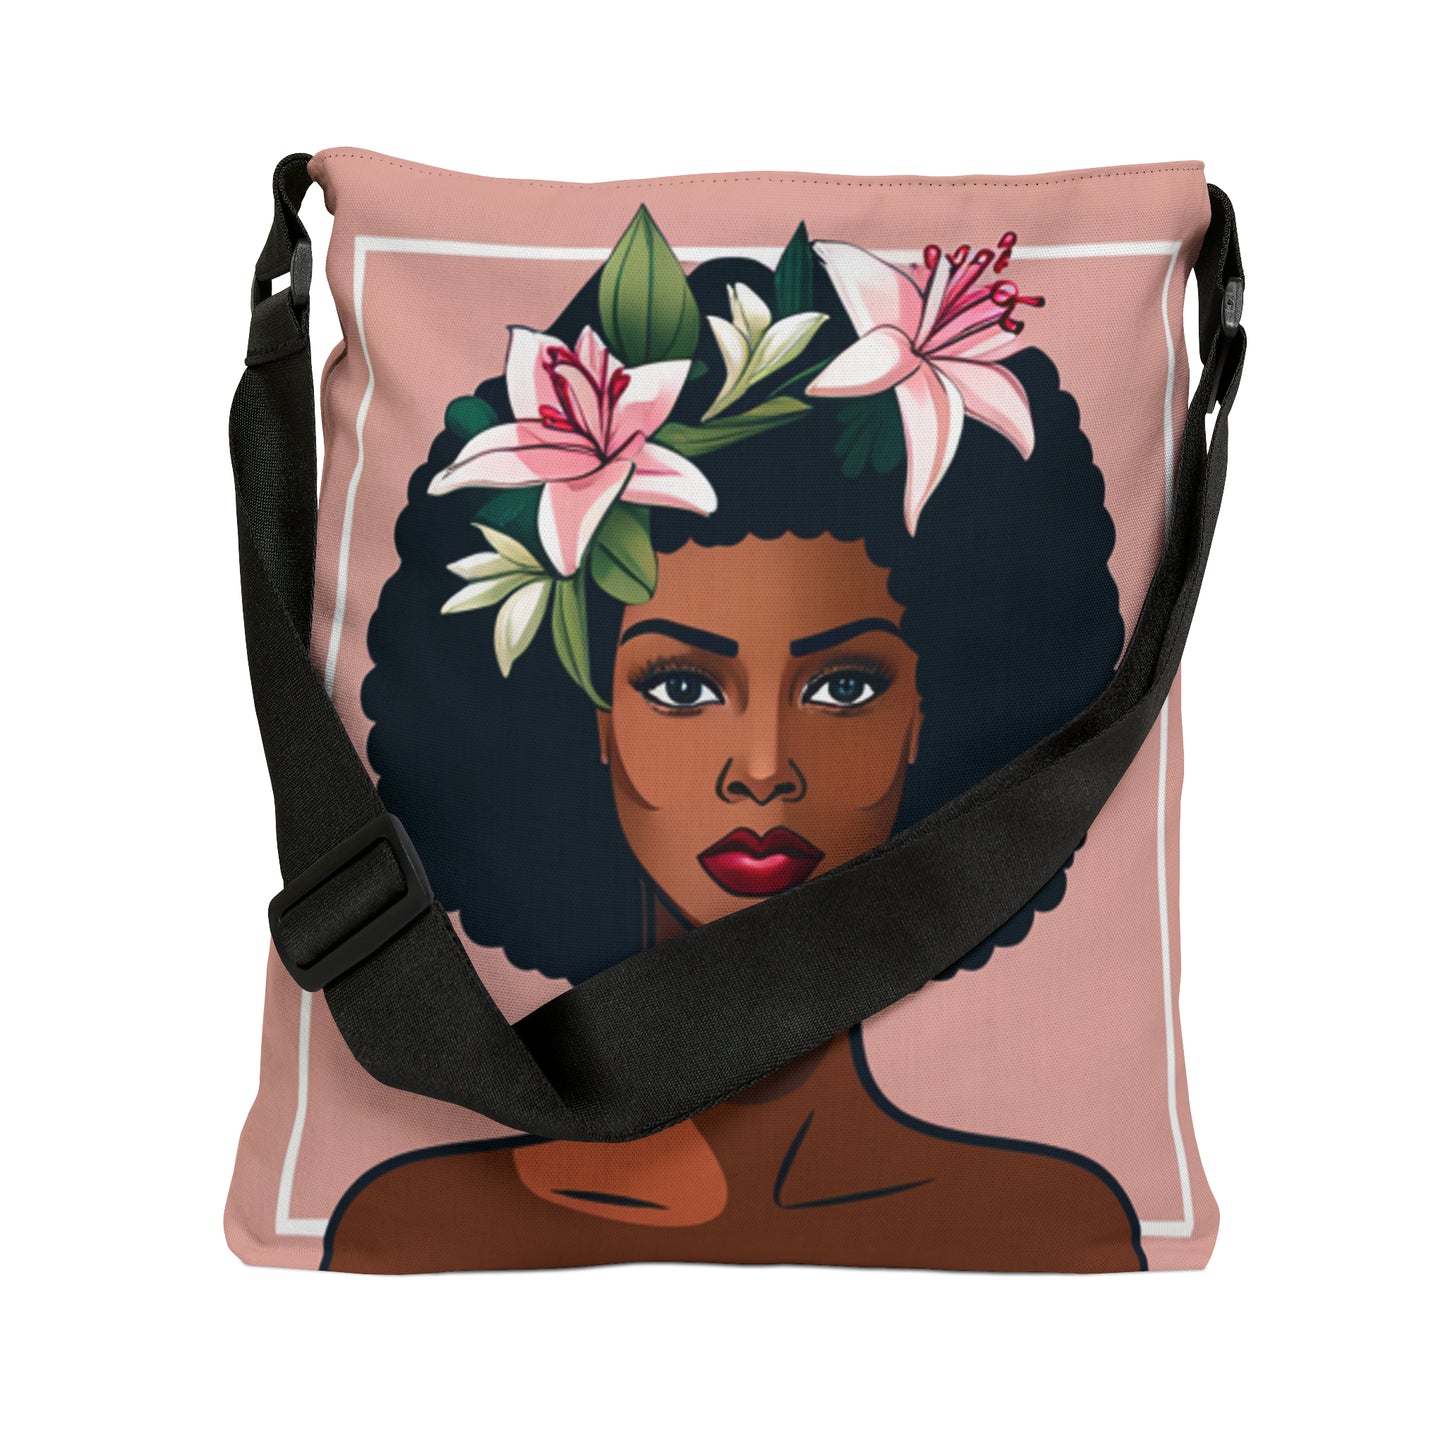 Lillies and Afros Adjustable Tote Bag